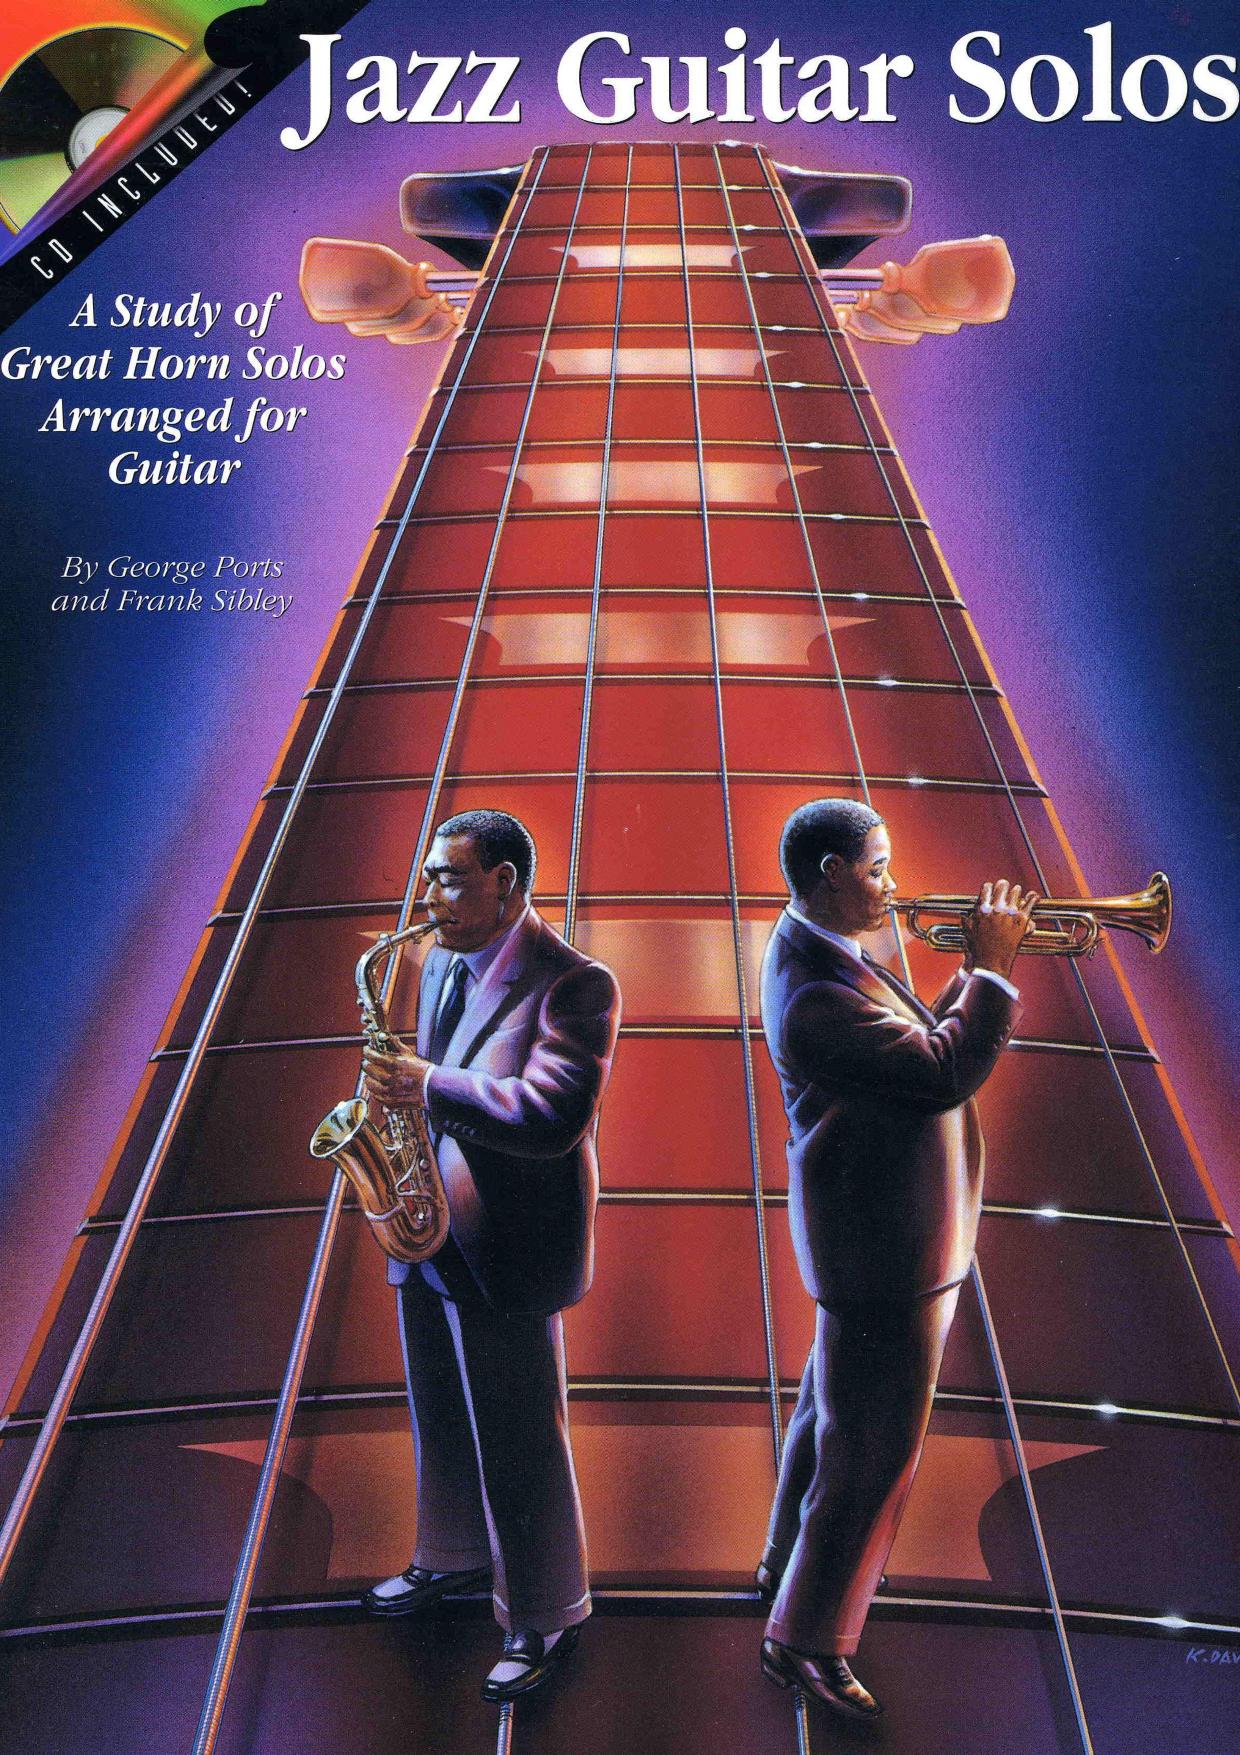 Jazz Guitar Solos: A Study of Great Horn Solos Arranged for Guitar